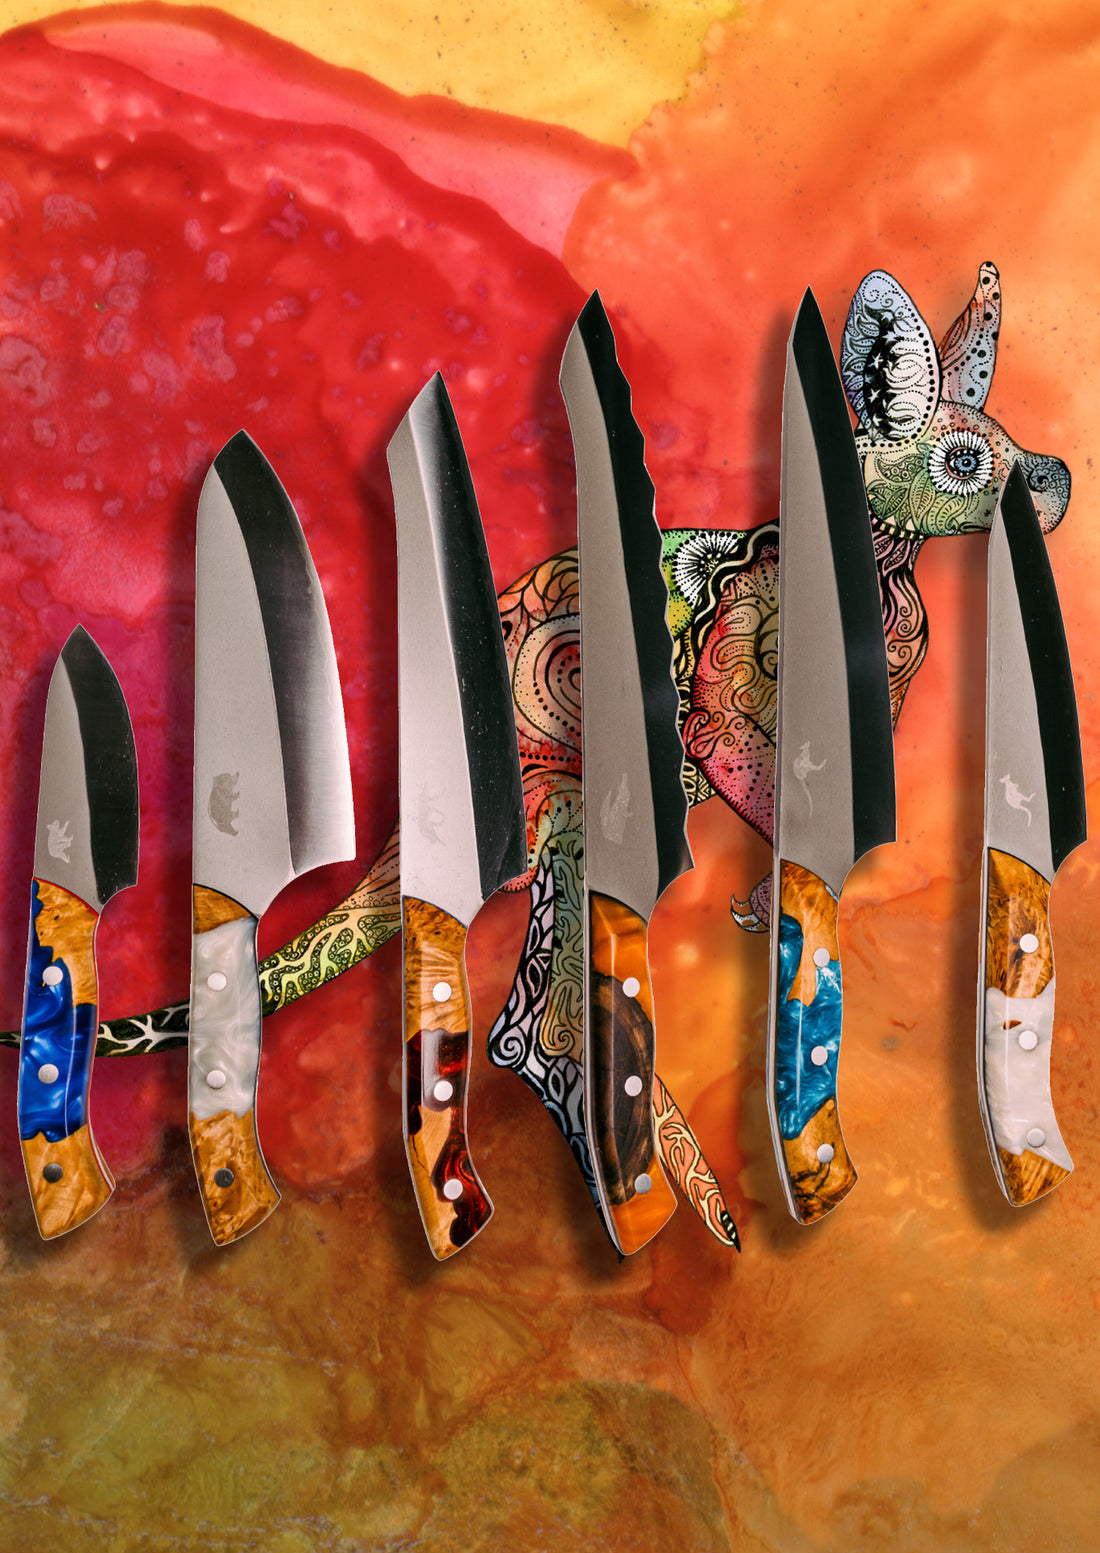 Complete 6 Knife Collecton | "Big Red" Kit - Big Red Knives